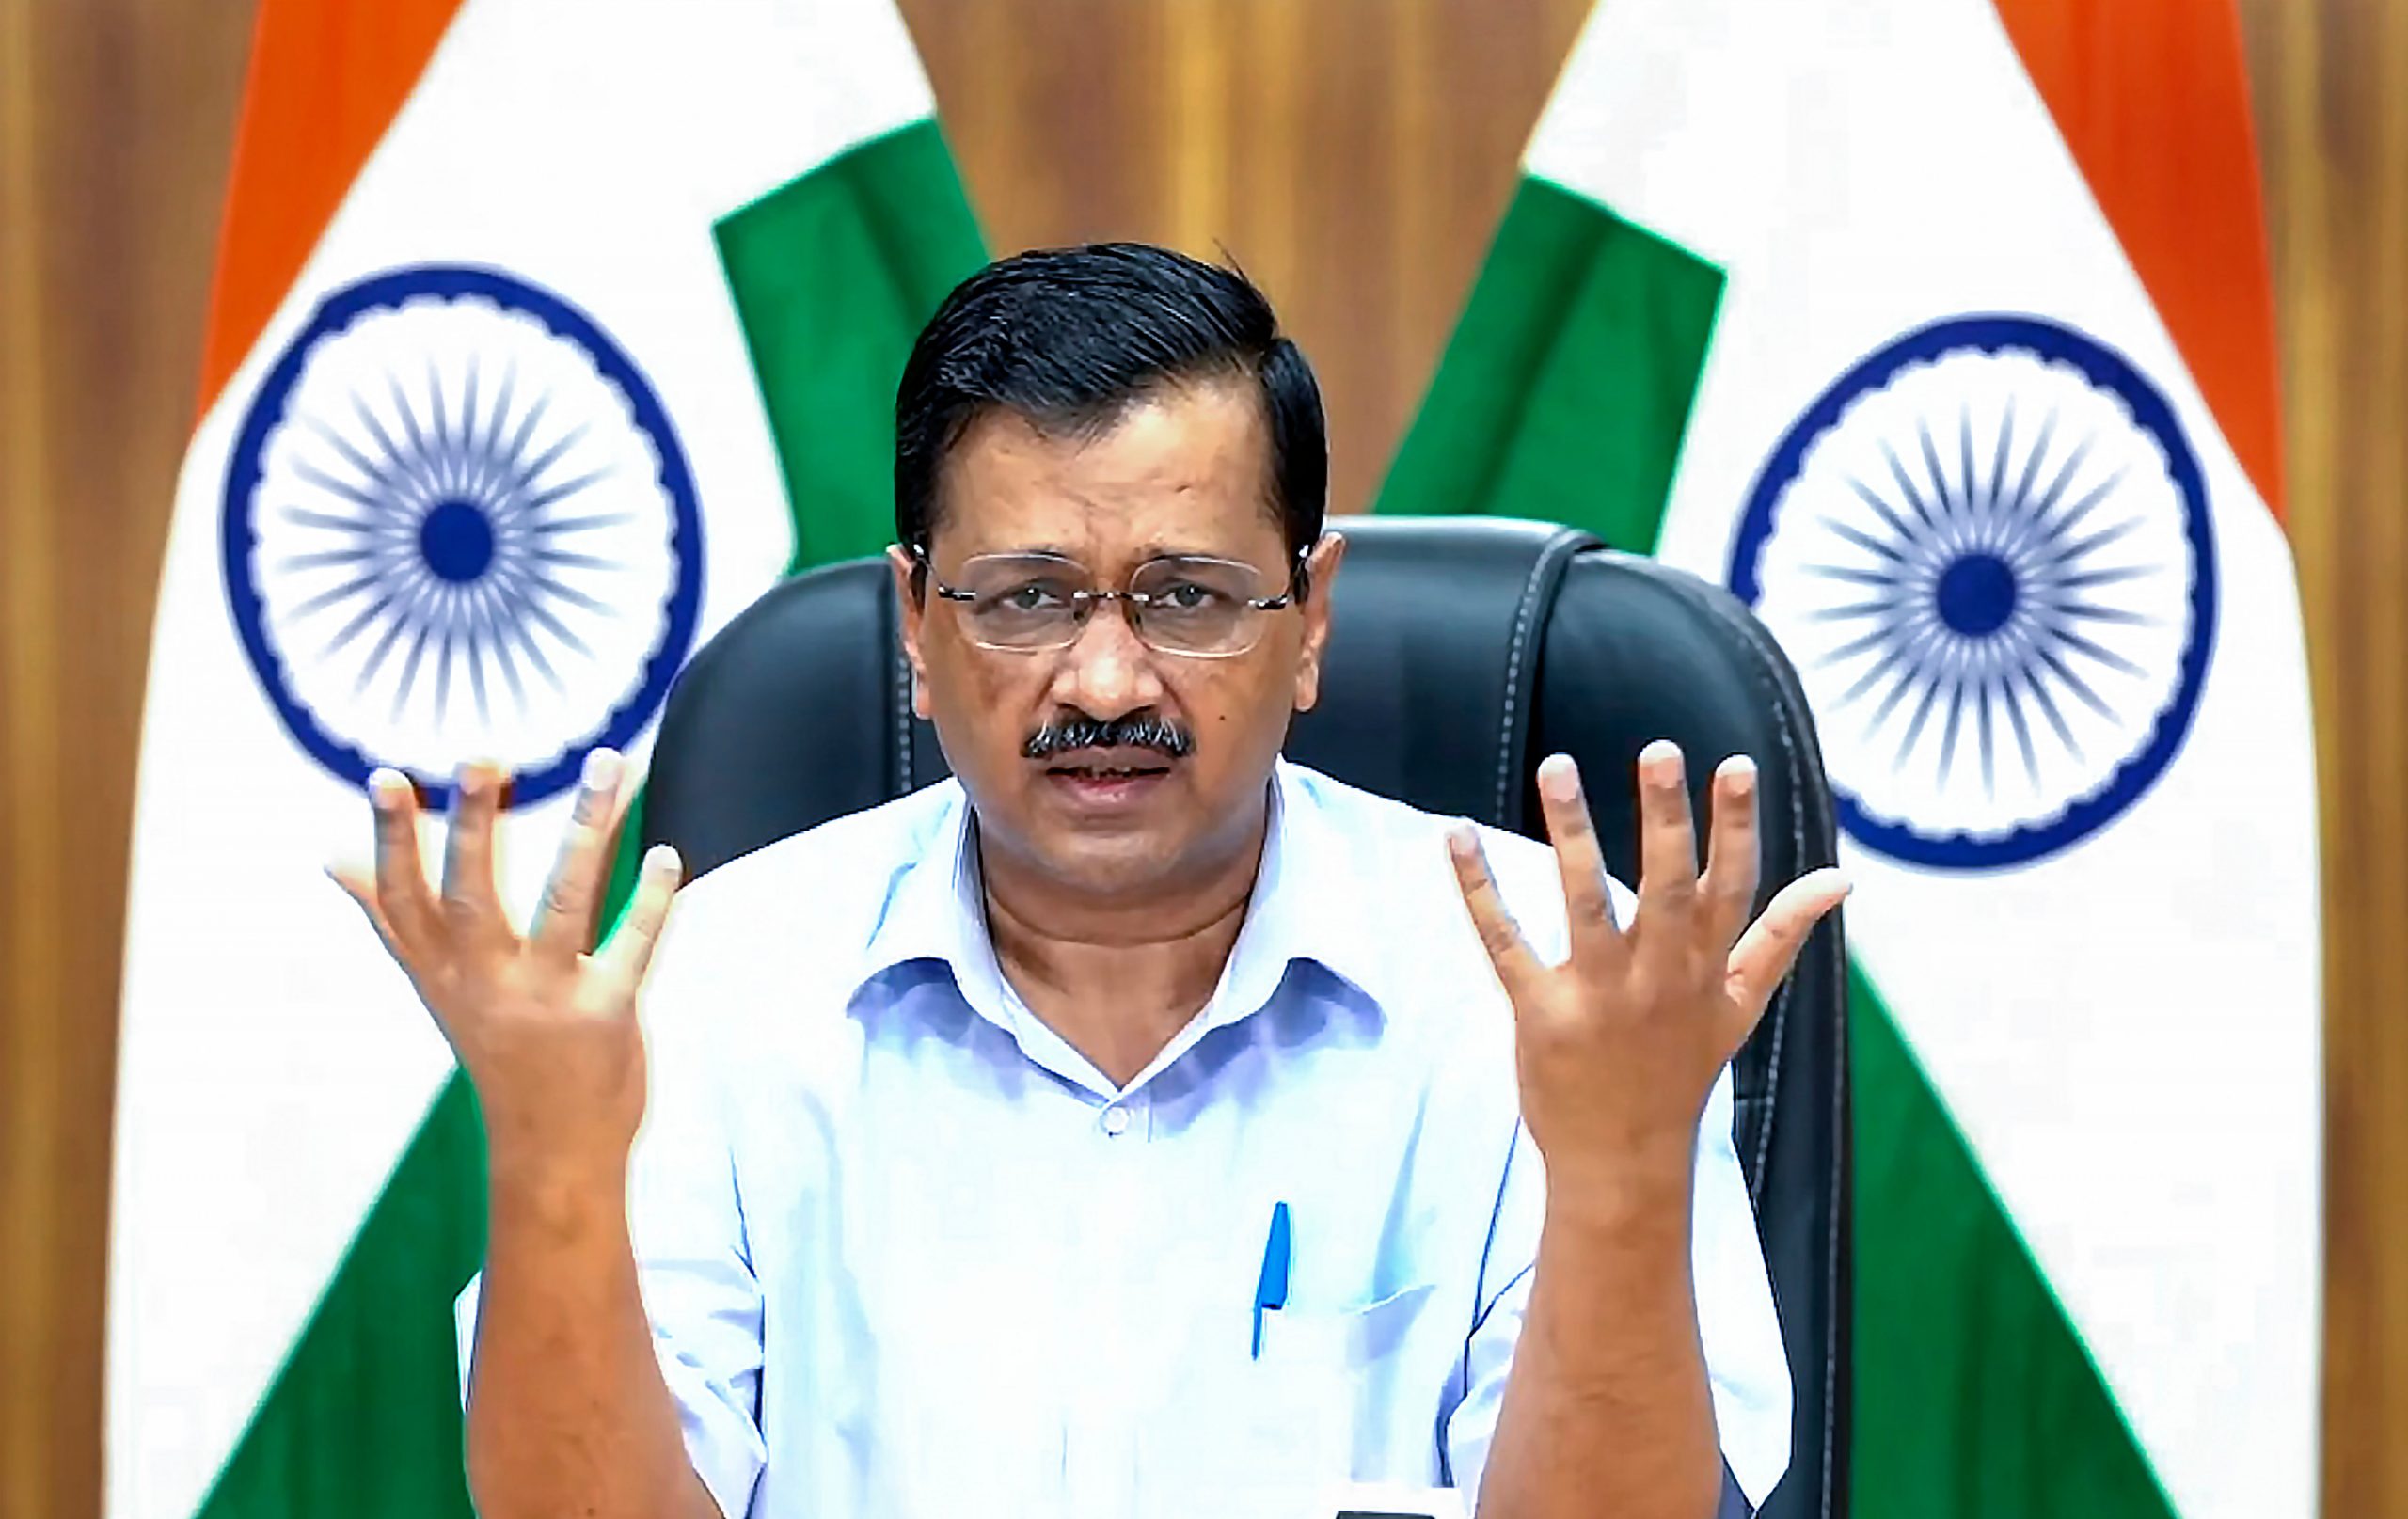 Pfizer, Moderna refused to sell COVID vaccines to us: Delhi CM Arvind Kejriwal